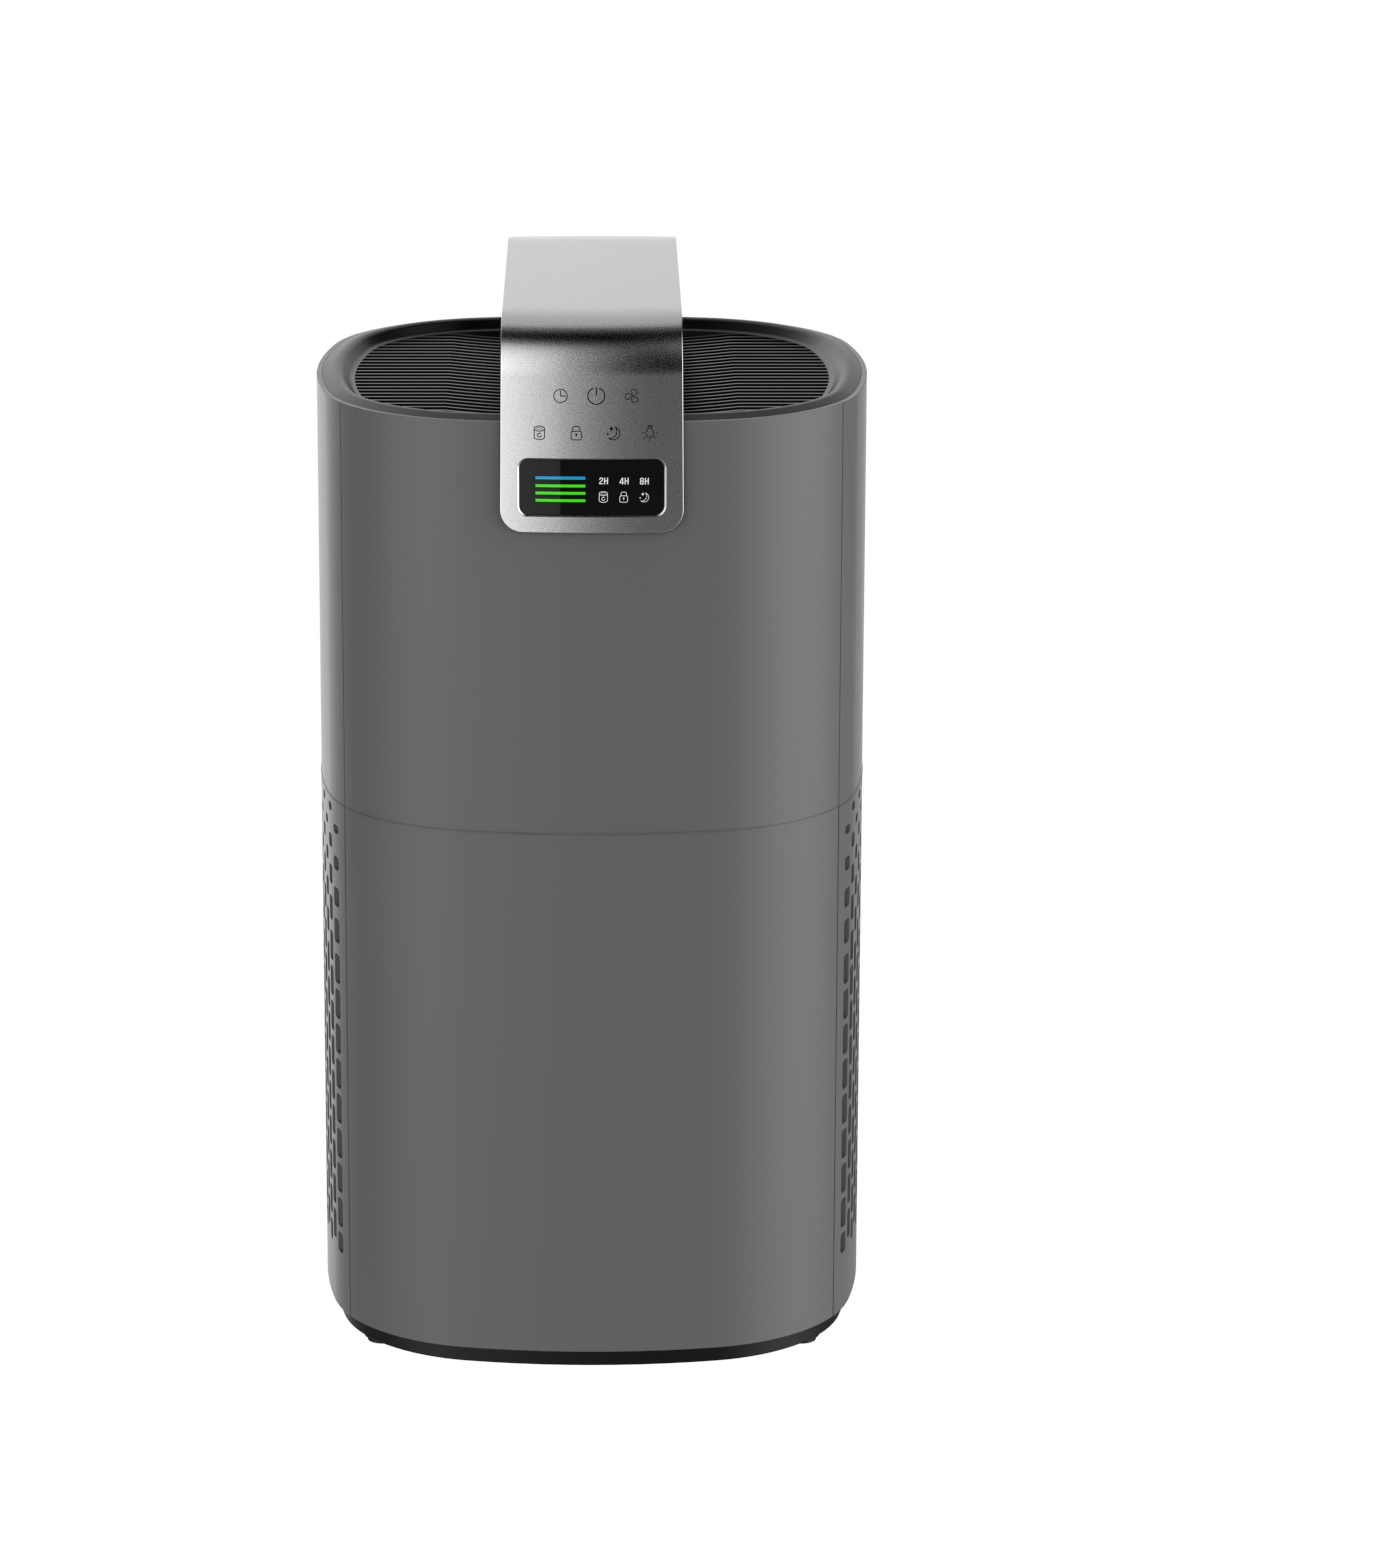 JNUO Air Purifier - Advanced Filtration for Complete Protection